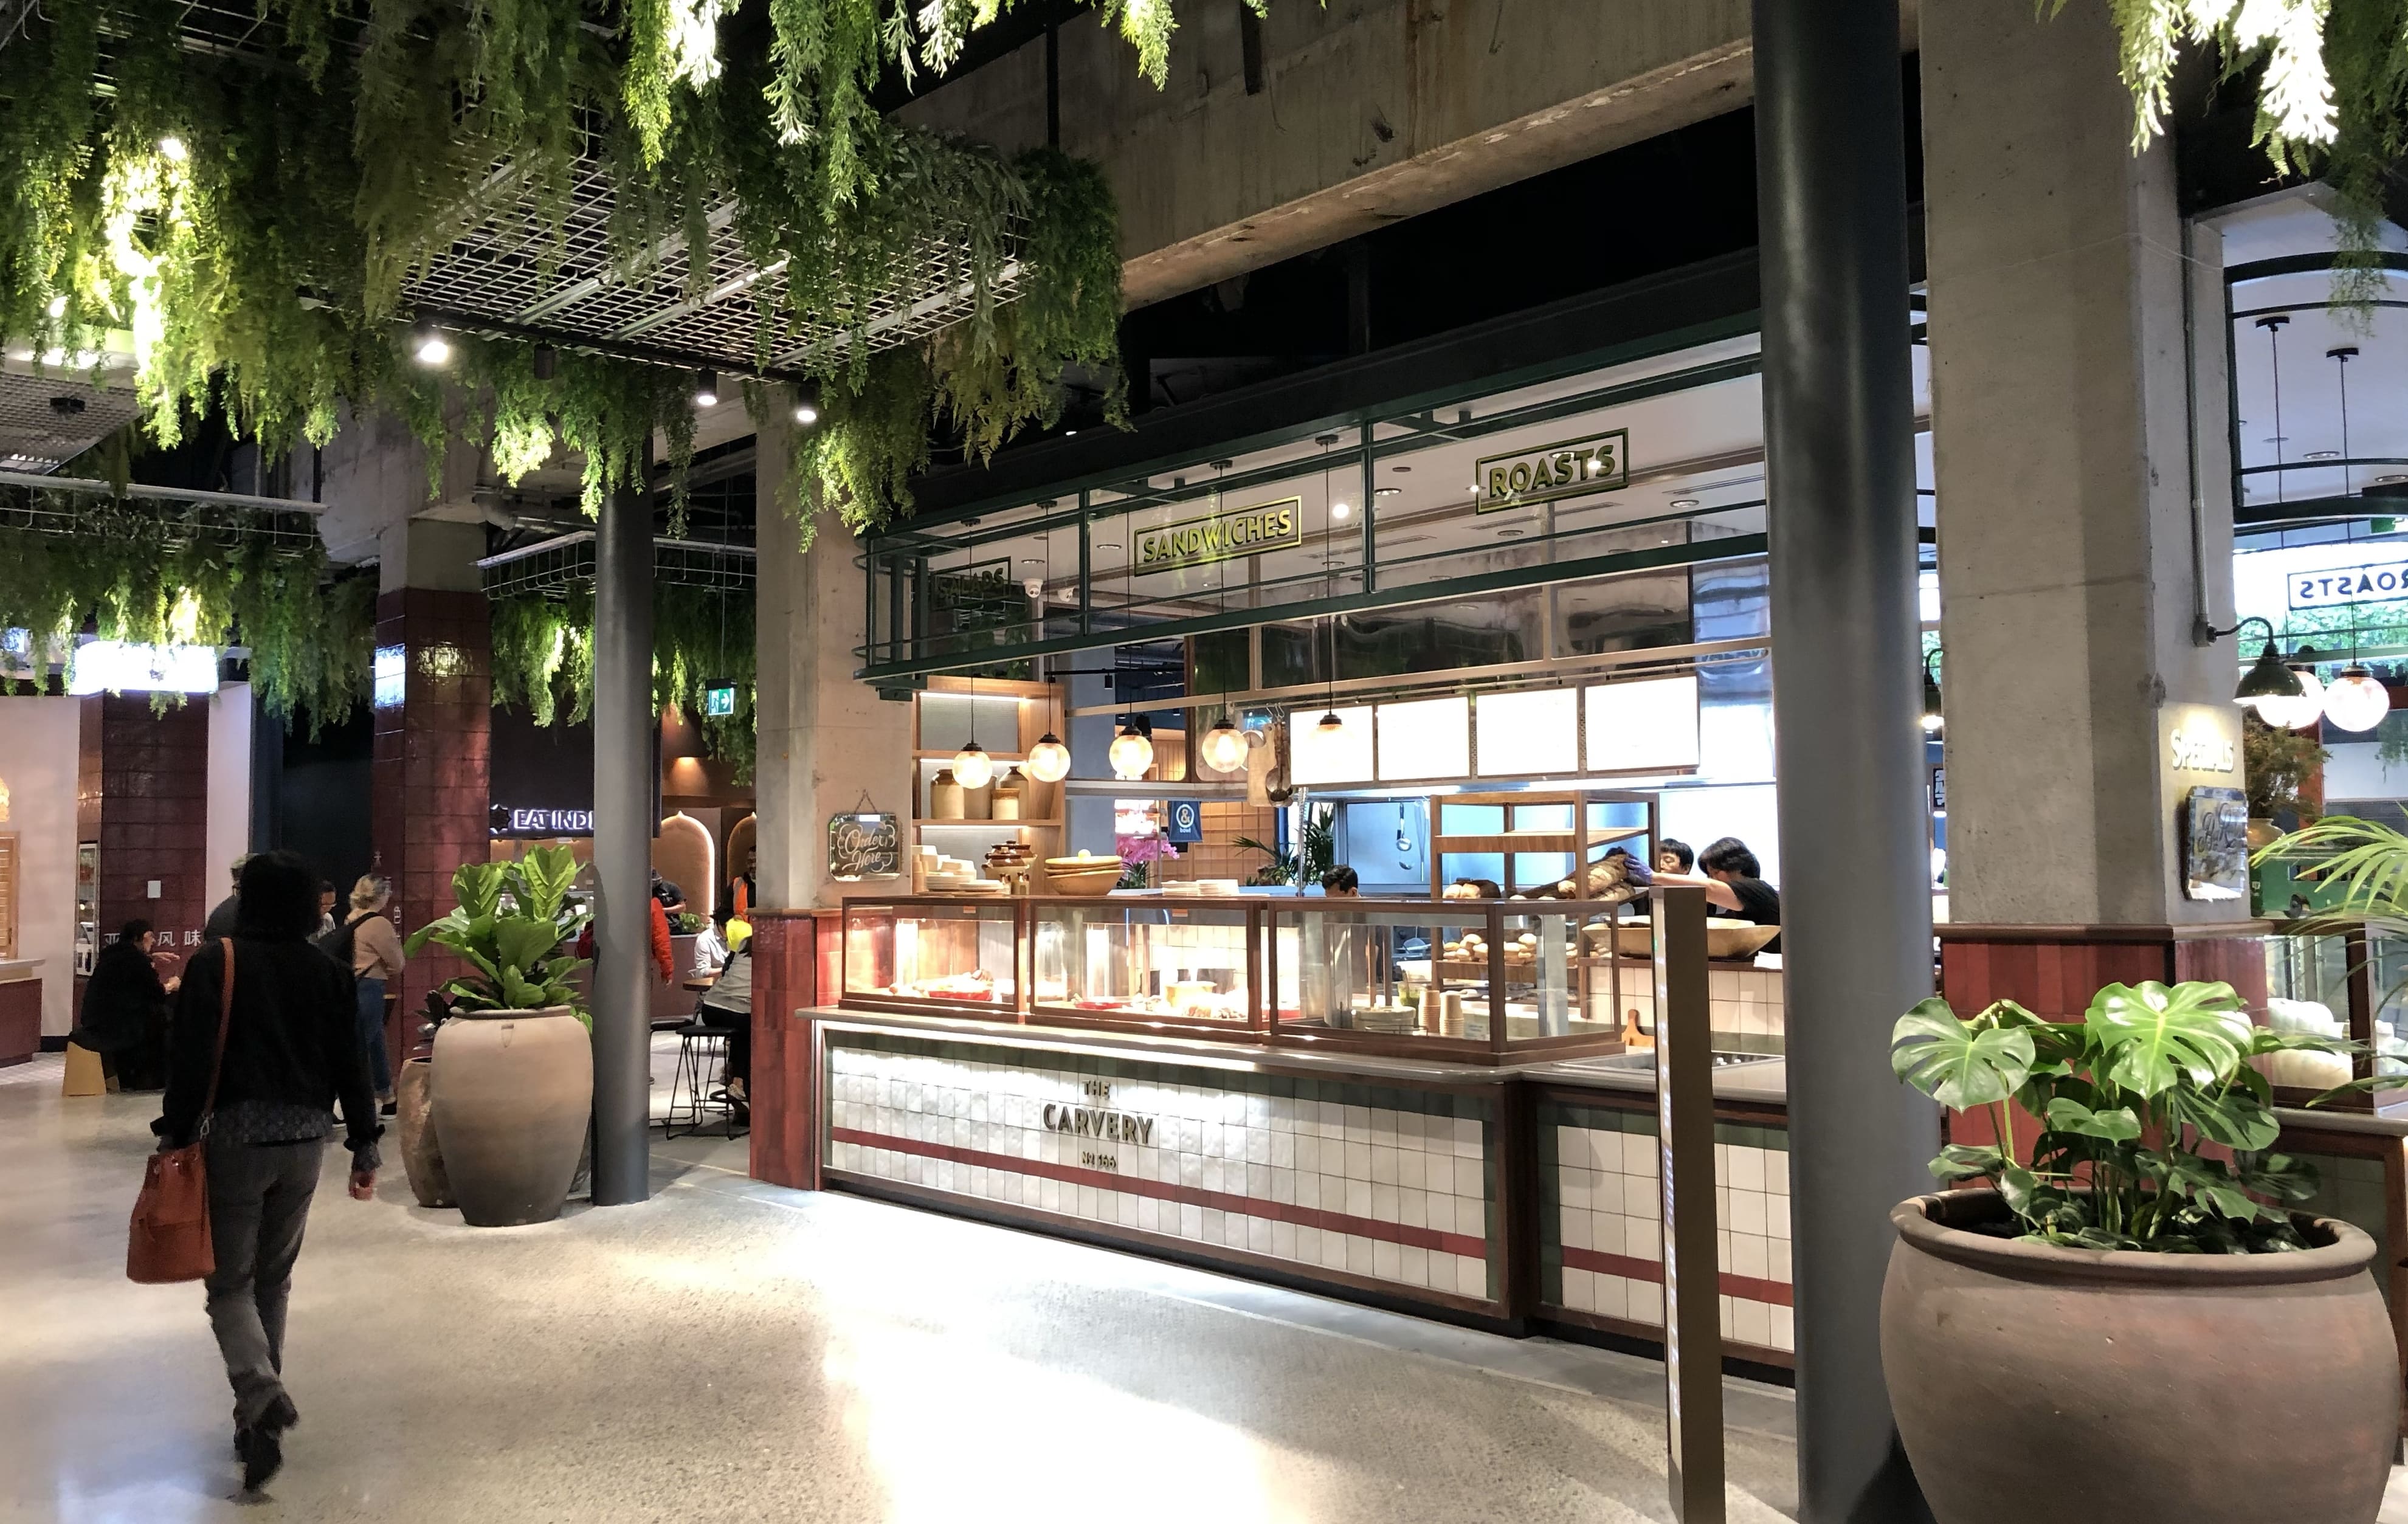 The new Westfield Newmarket, which opened in early October, has set a new standard in food and hospitality for New Zealand with its suite of modern cafes, food stores, The Eatery Food Hall and the amazing Rooftop On Broadway.